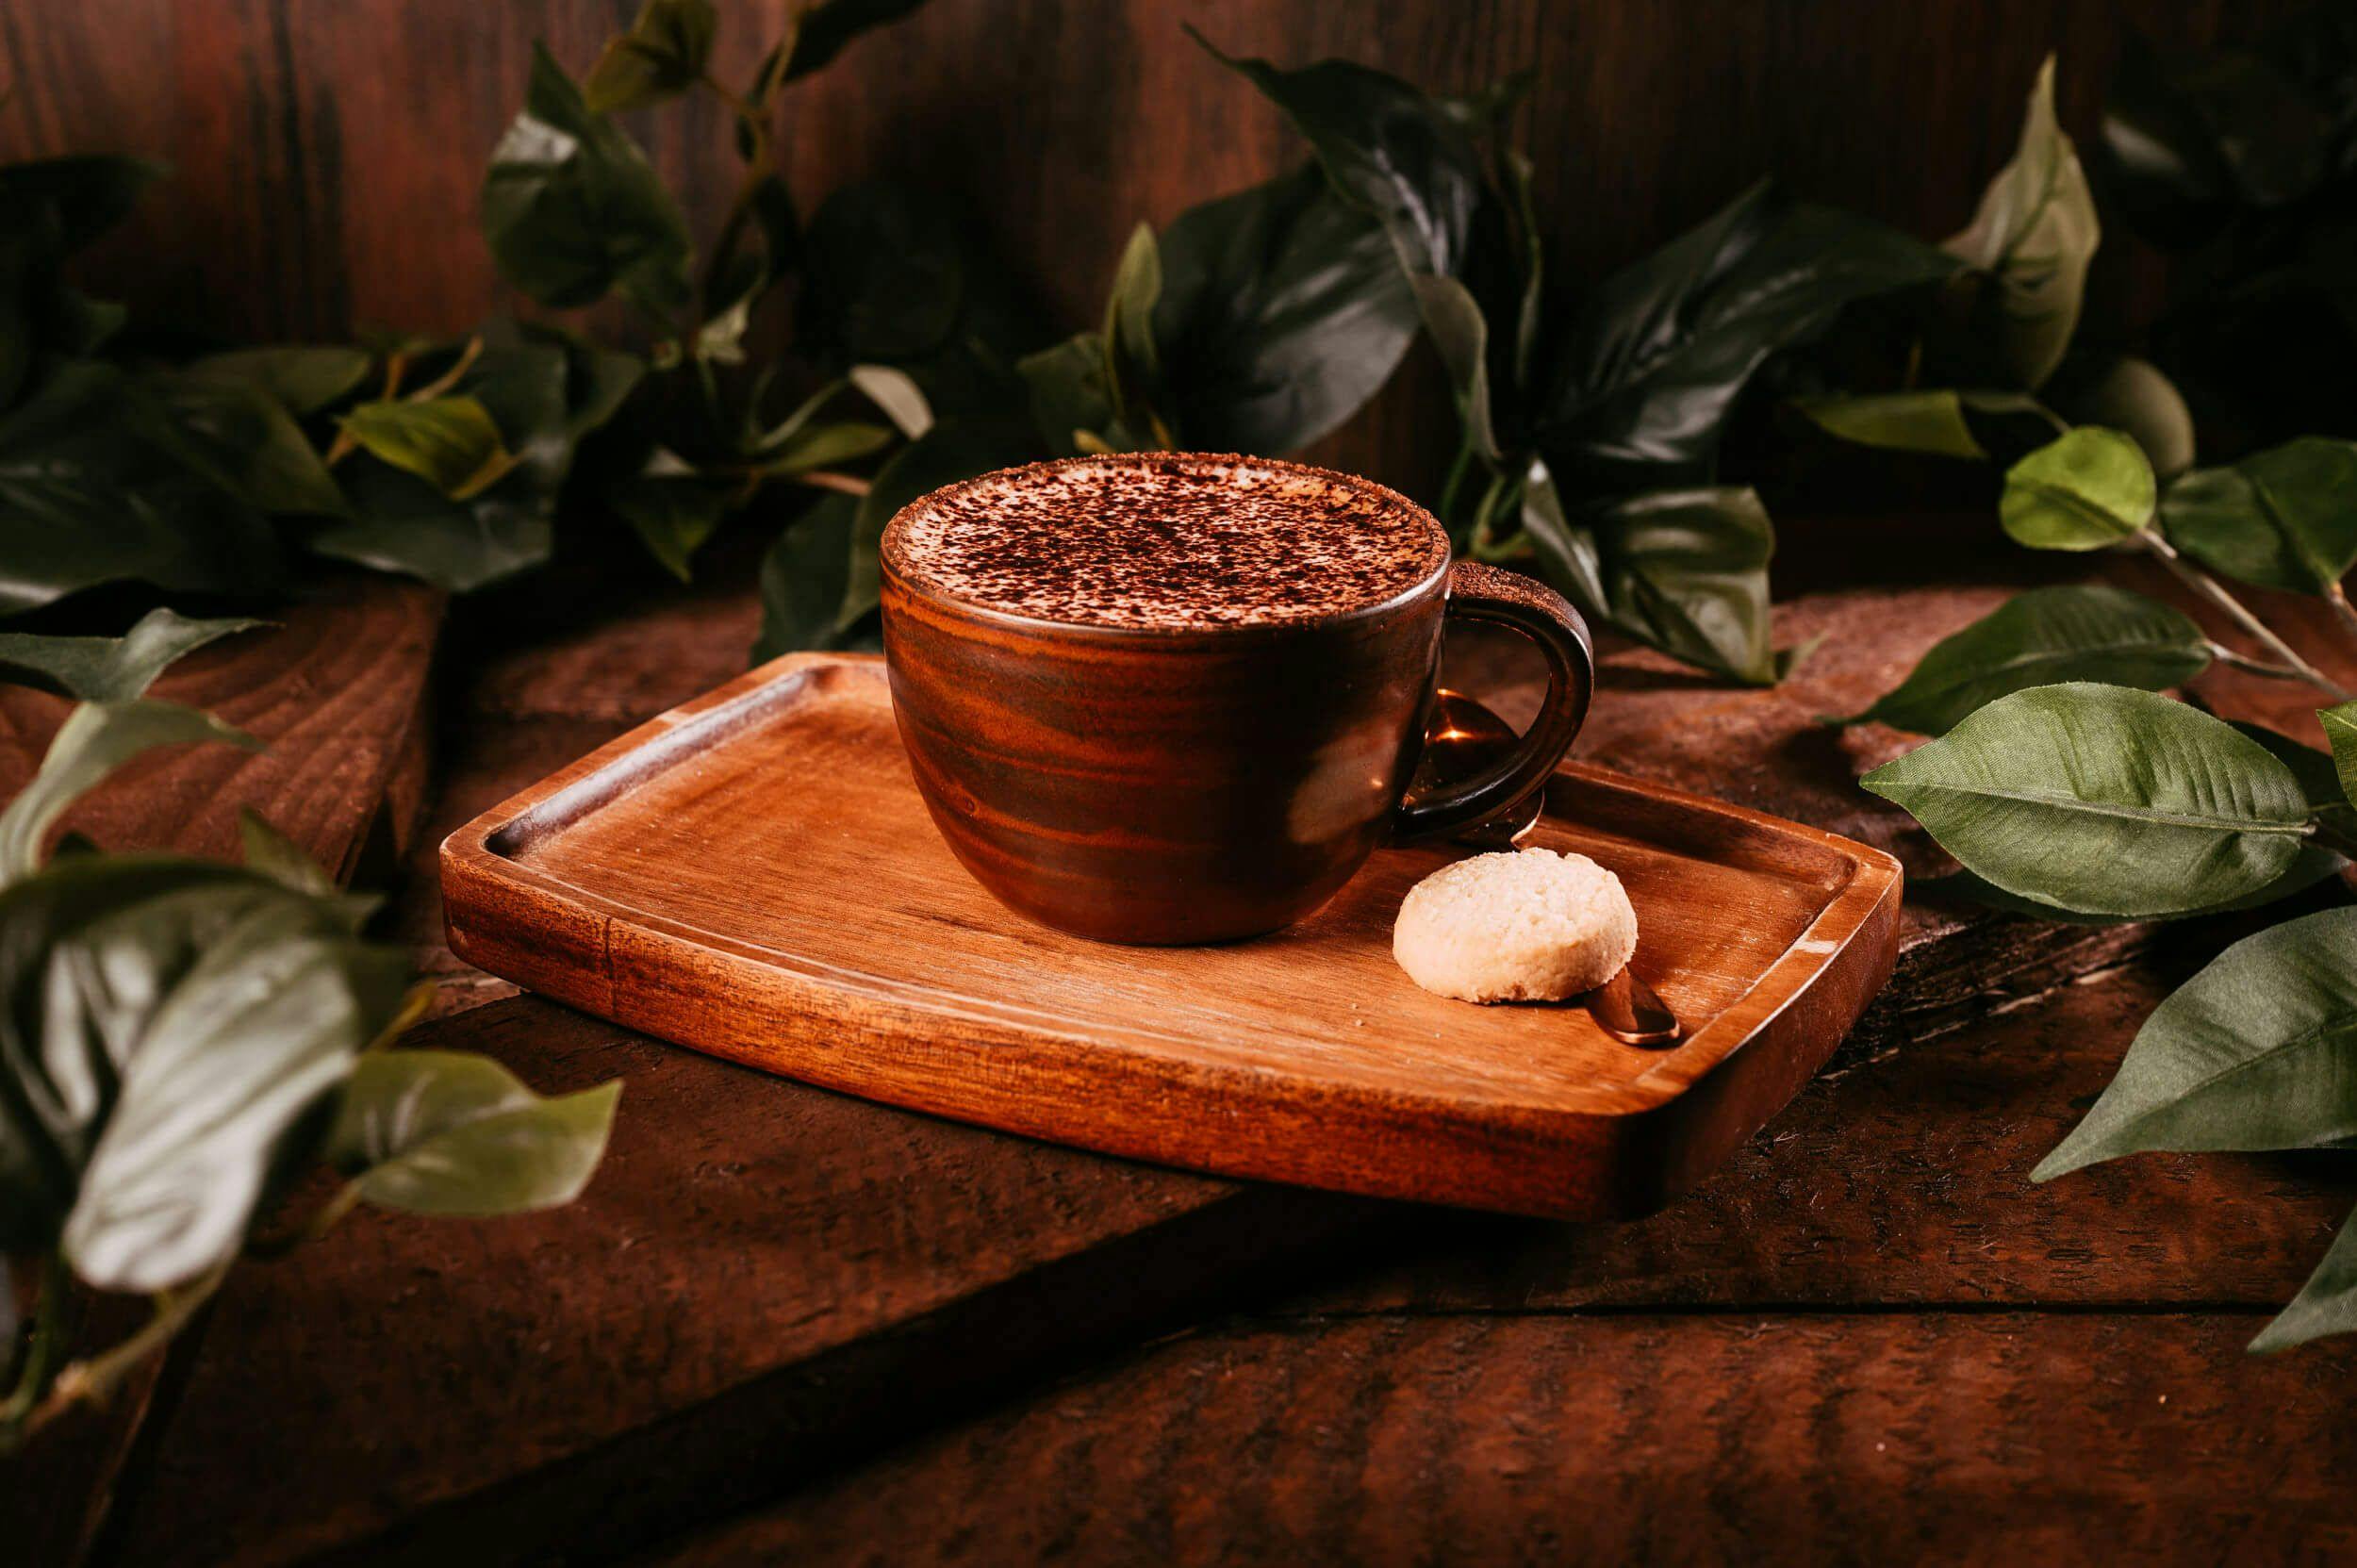 Image of a cappuccino with a small biscuit on a wooden tray nestled in some green foliage.